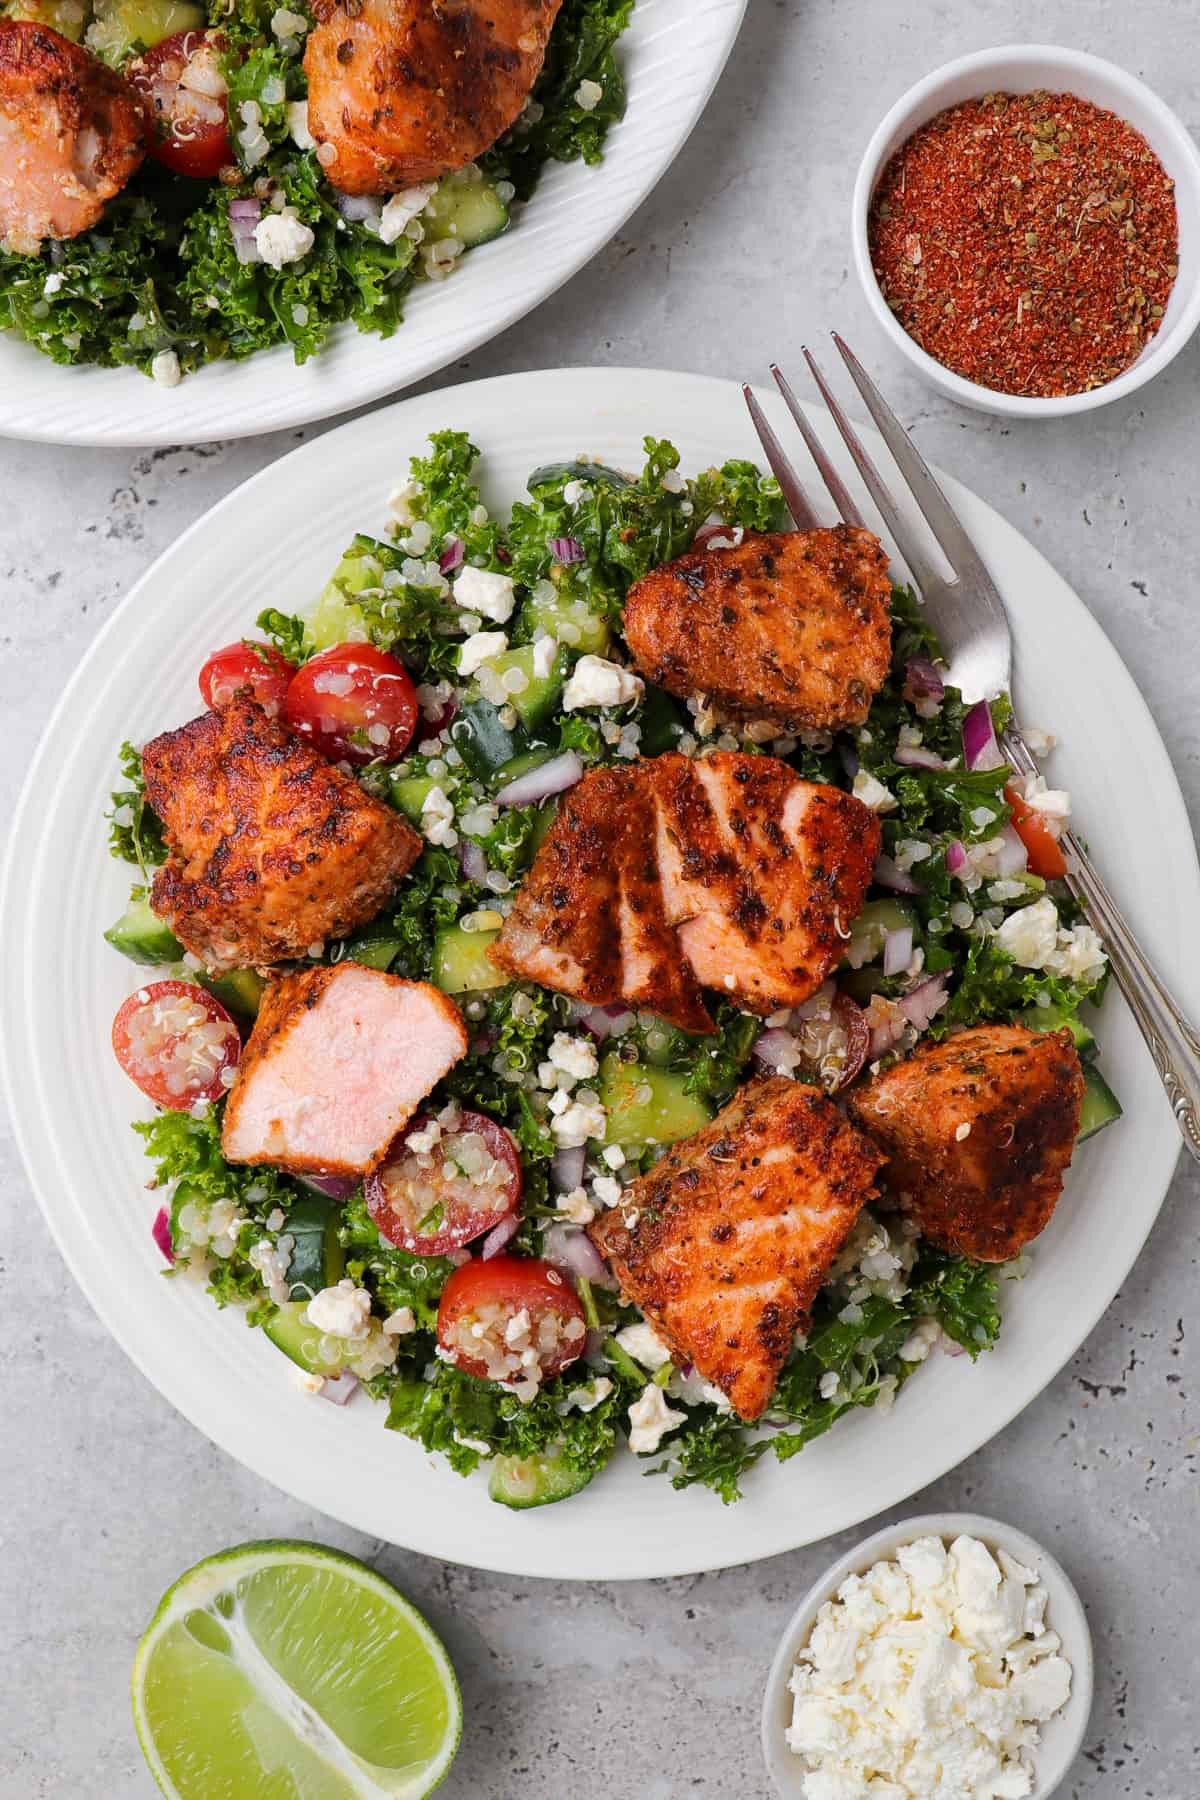 Kale and quinoa salad on a plate with cajun salmon on top.